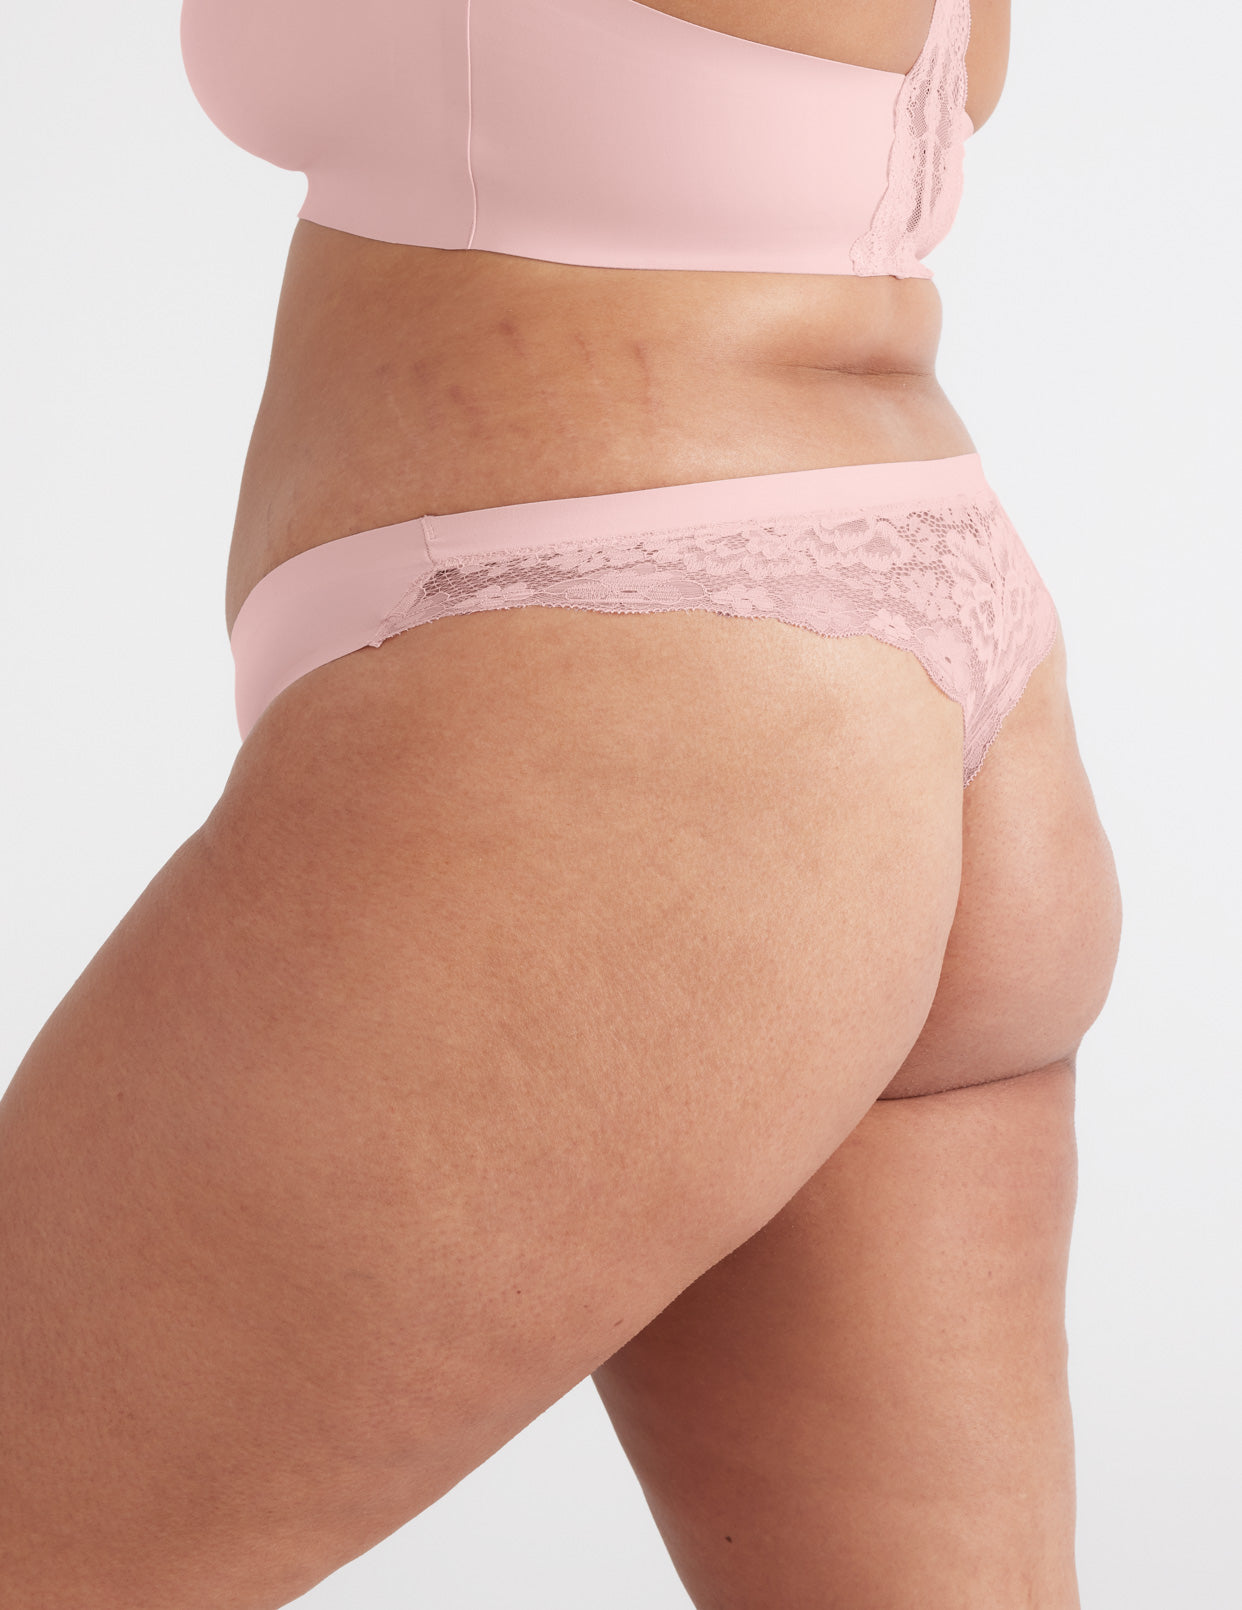 Lace Essential Thong - Knix - Knix